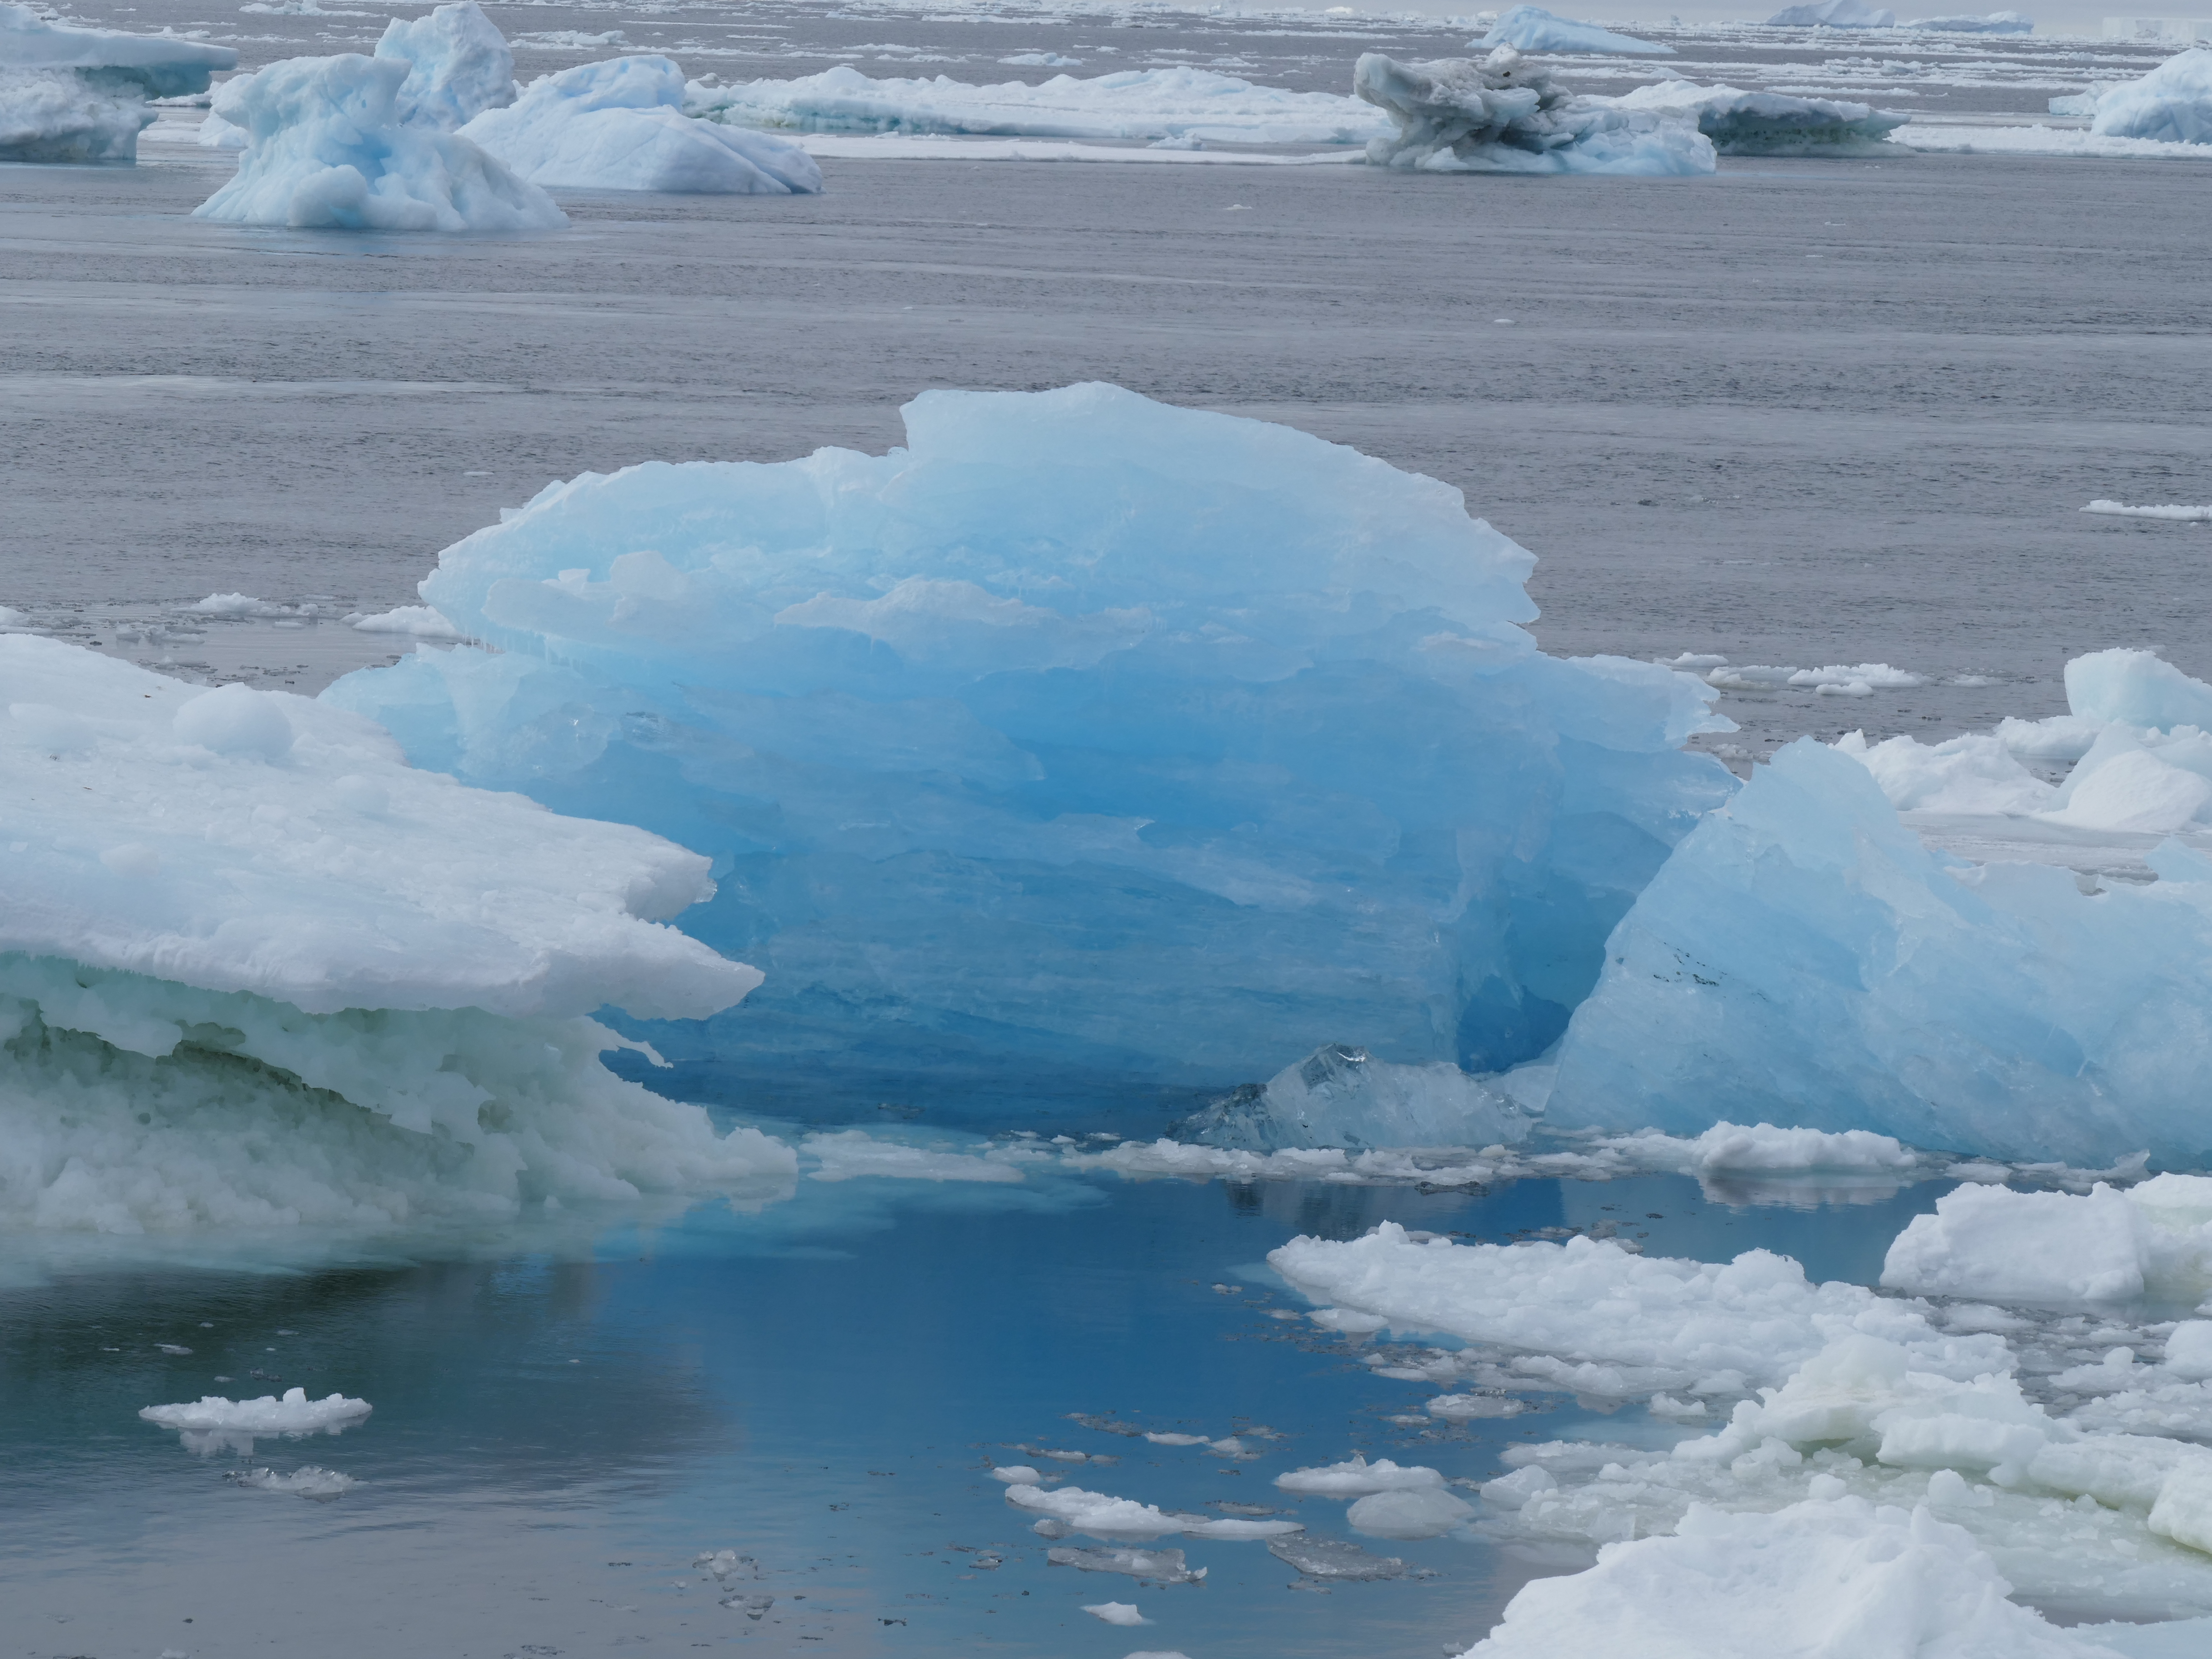 Icebergs melting in the Weddell Sea